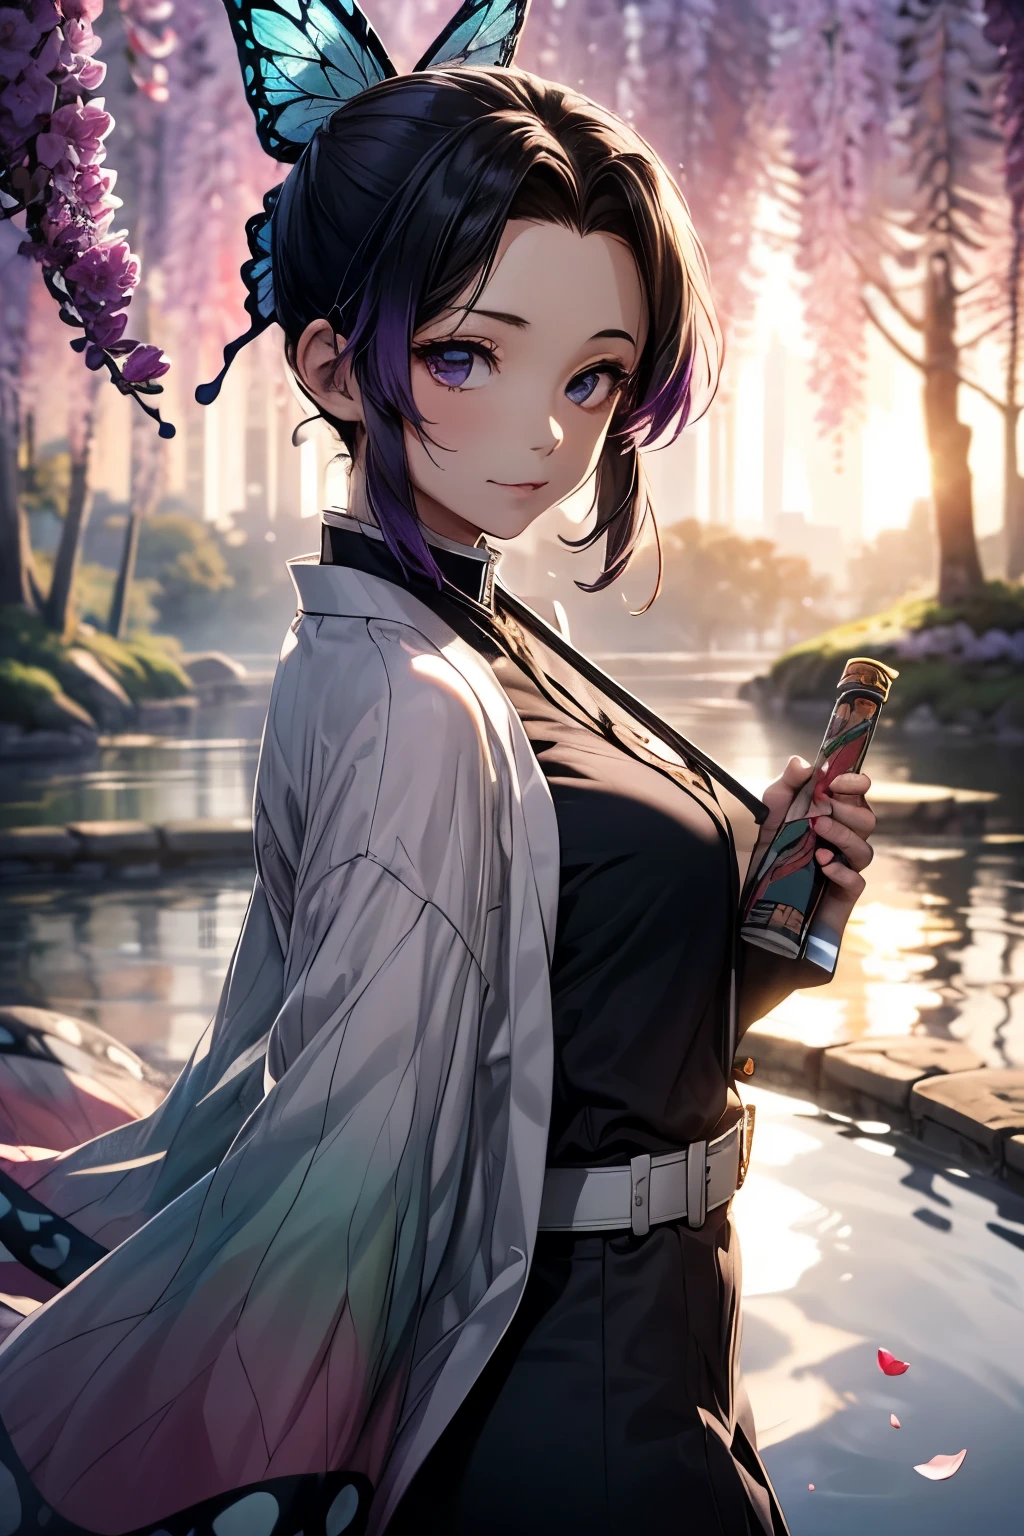 Extremely detailed and high-resolution masterpiece of Kocho Shinobu, the beautiful and deadly Demon Slayer in dynamic action. Add emphasis on the intricate details of her butterfly-themed outfit and the fierce expression on her face. Set the scene at twilight, with a serene pond and cherry blossom petals in the background. Use rich colors and volumetric light to create a sense of ethereal beauty and power.